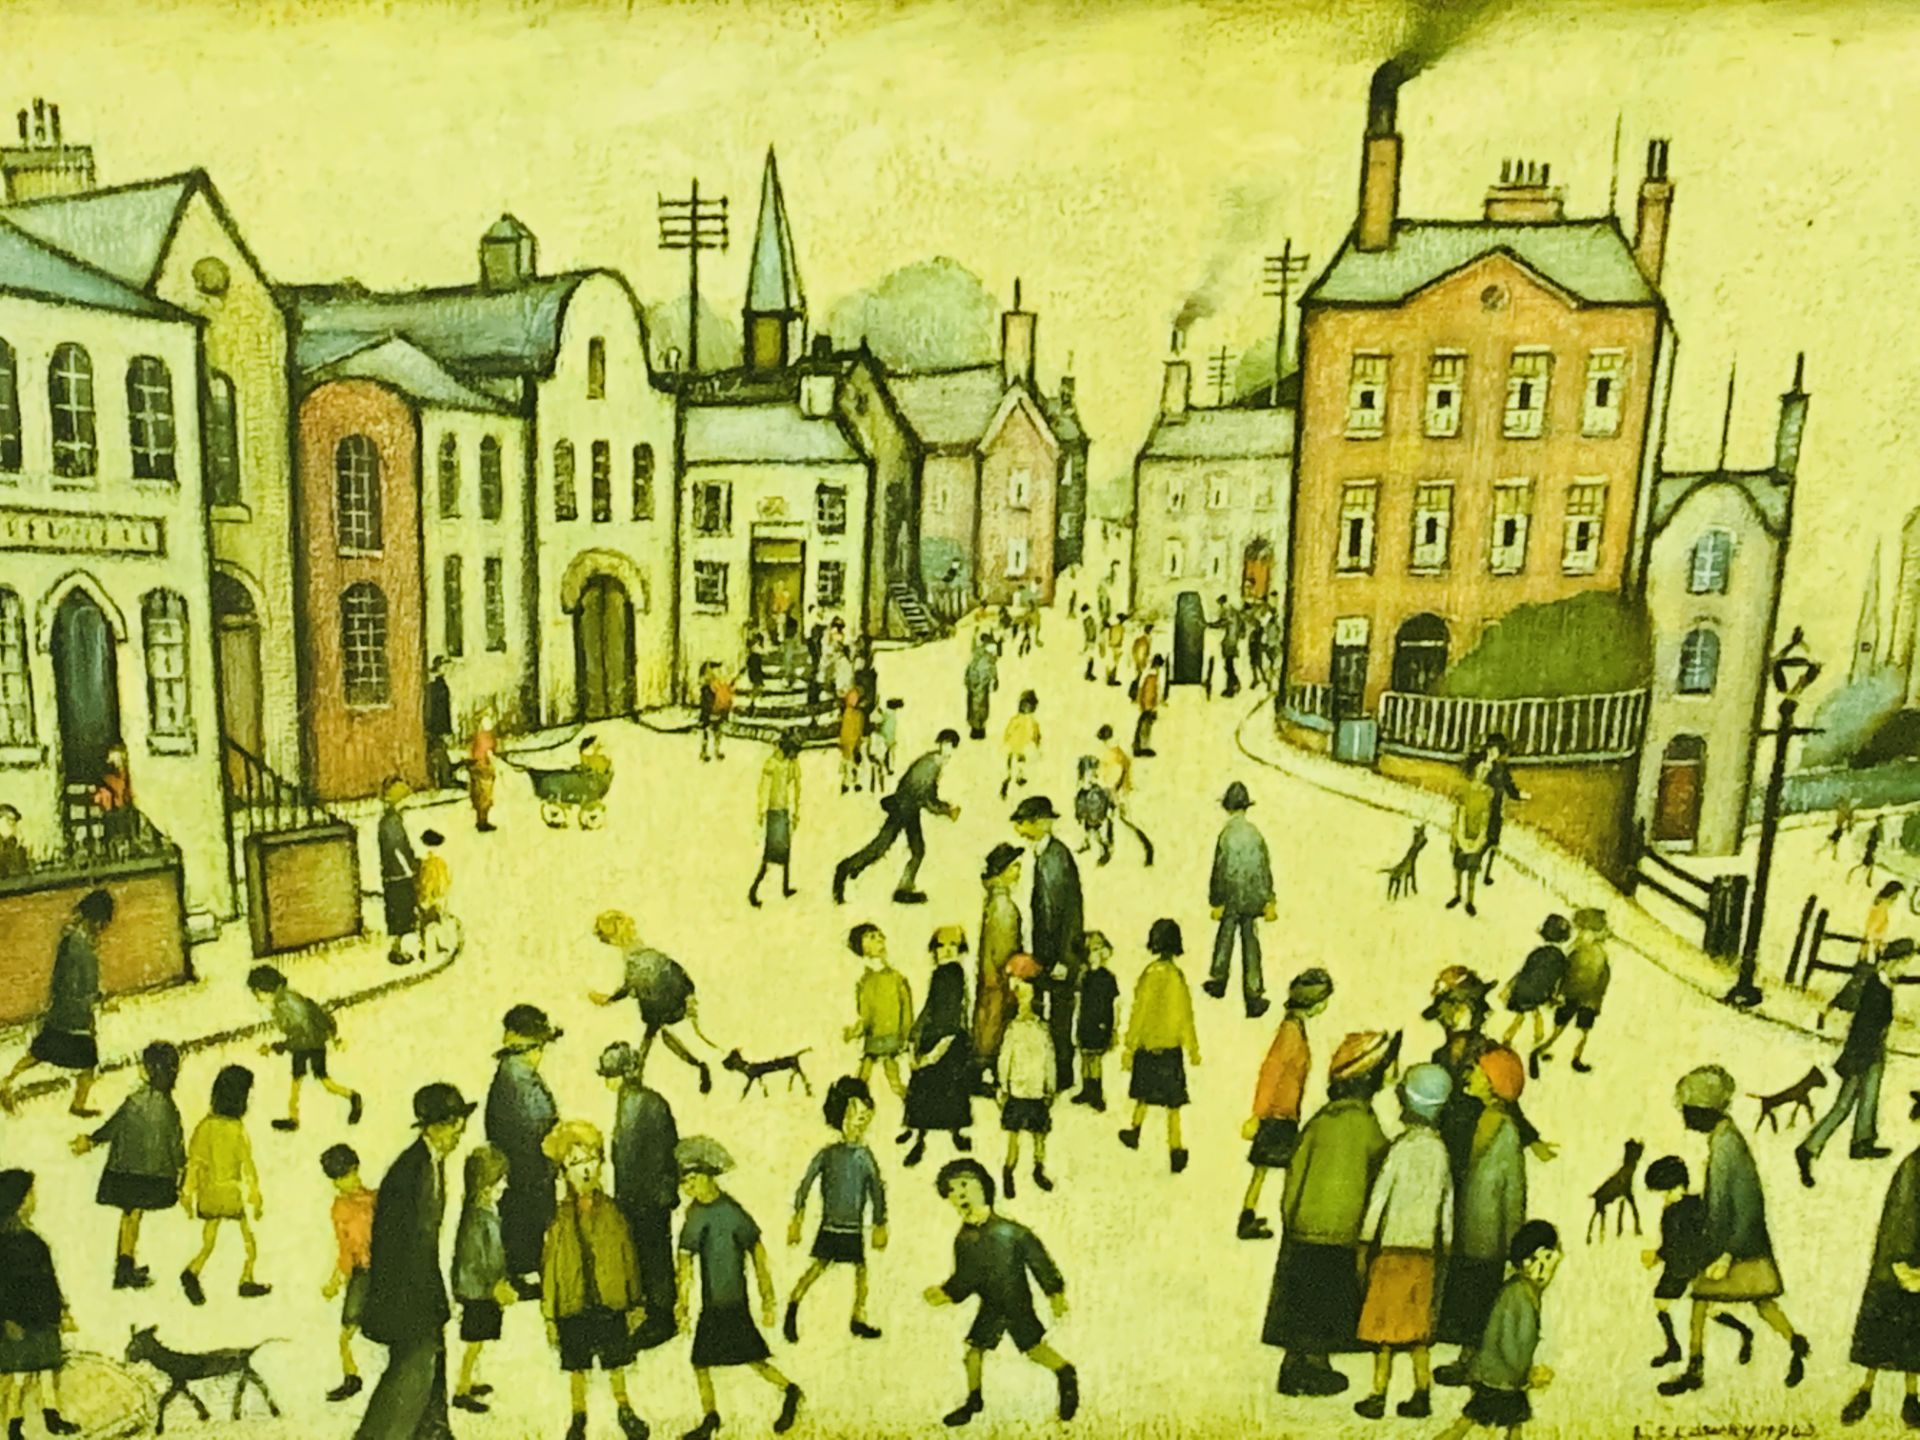 Framed and glazed L S Lowry print together with an L S Lowry block print. - Image 2 of 2